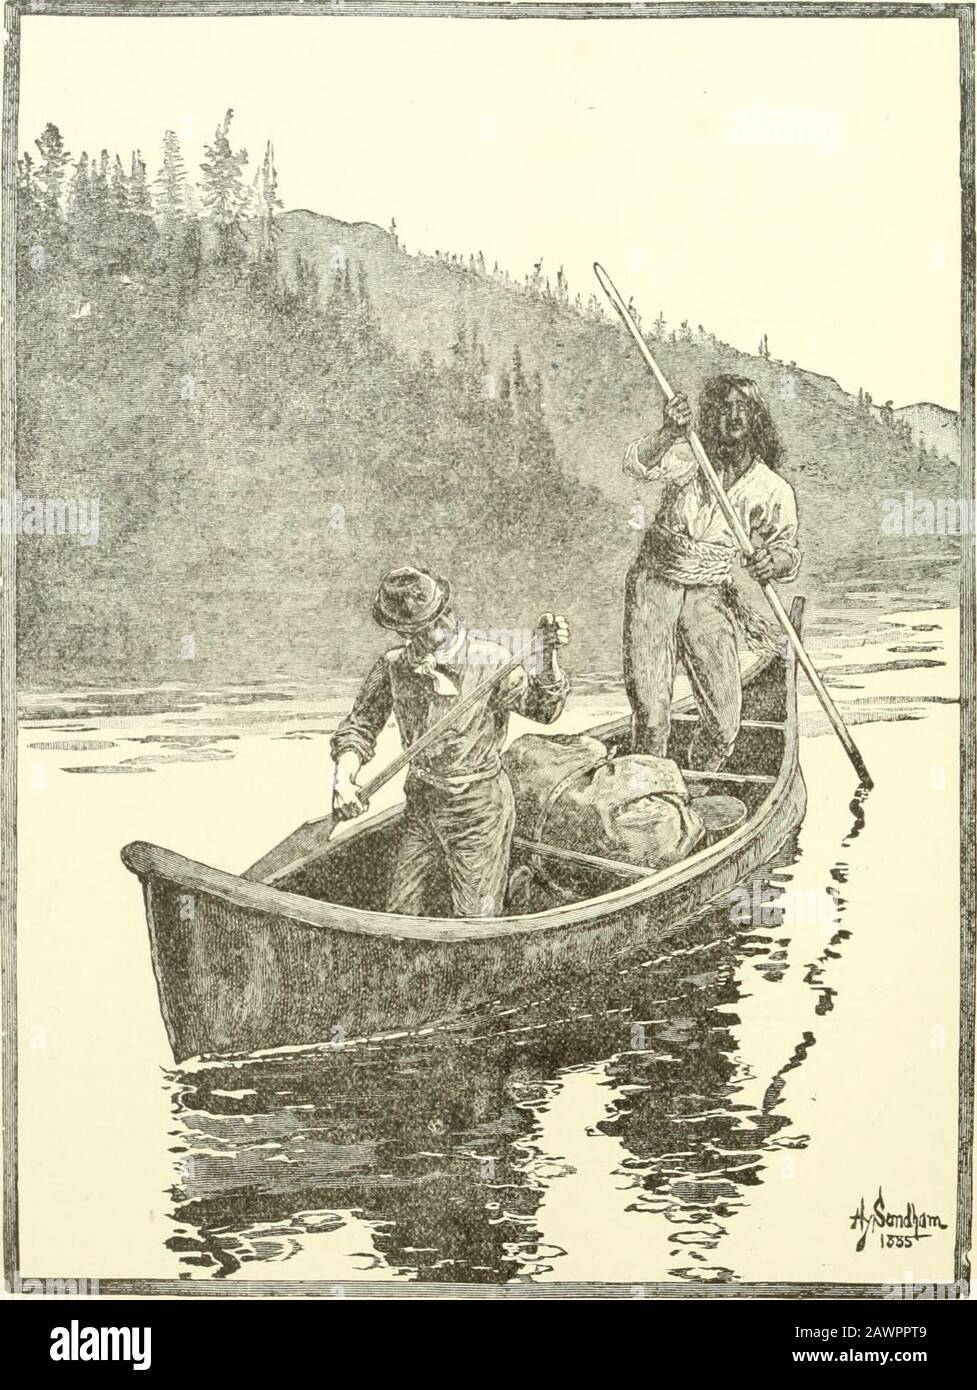 The American angler . m. Illustrated //. E. ILxydock 45 The Tarpon OR Sii.VKK Kim;. Illustrated.... /////. C. Harris 47 NOTK.S ANII OlF.RIKS ?! Stream Trout Fisliiny—Can Black Bass See at Night—The Secret of Catching- Catties—Reminiscences of Nessniuk, continued—Fishing on the Upper Mira-michi- The Bucktail Fly in Foreign Parts--A Fisher-man in Town (verse) -Fishing on the Texan (Julf—Another Sawfish Breaks His Blade—Care of Tackle inWinter—A Desirable Outing Locality—A Trip to St.Andrews, X. B.—The New York Fish Commission—The National Fish and Game Protective Association—Thread for Fly Tying Stock Photo